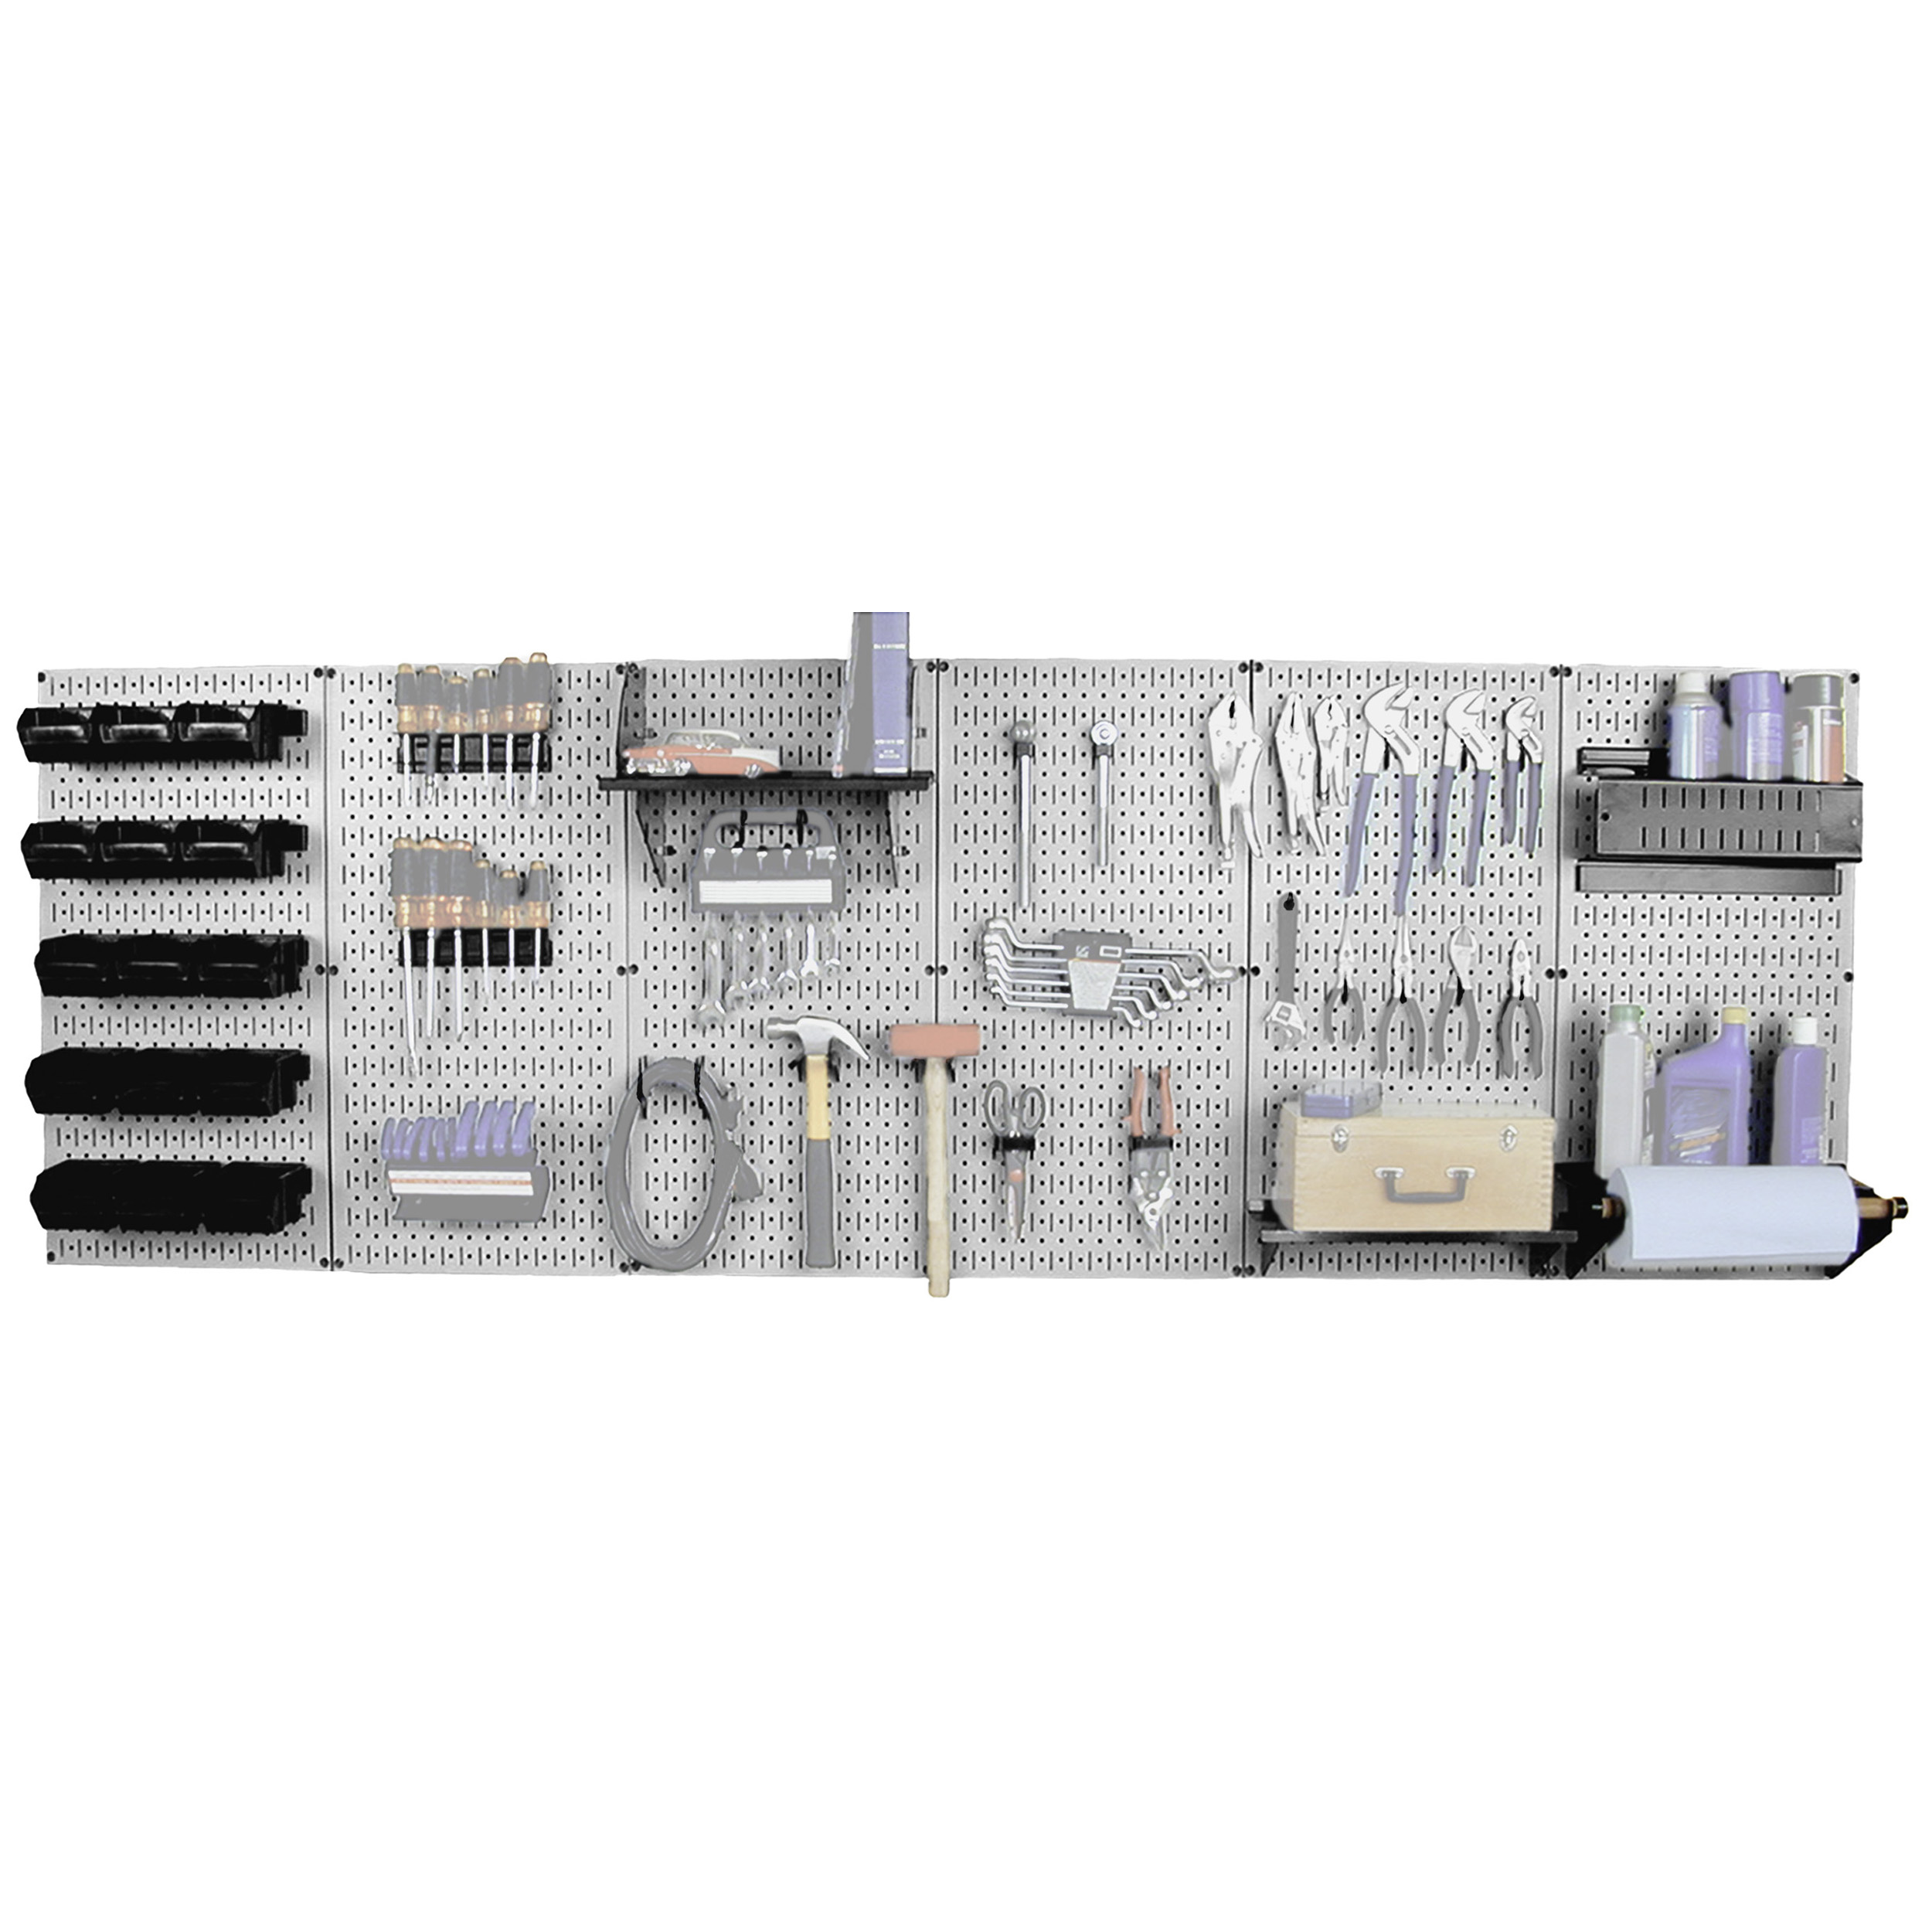 Steel Pegboard, Master Workbench Kit In Gray With Black Accessories, 8